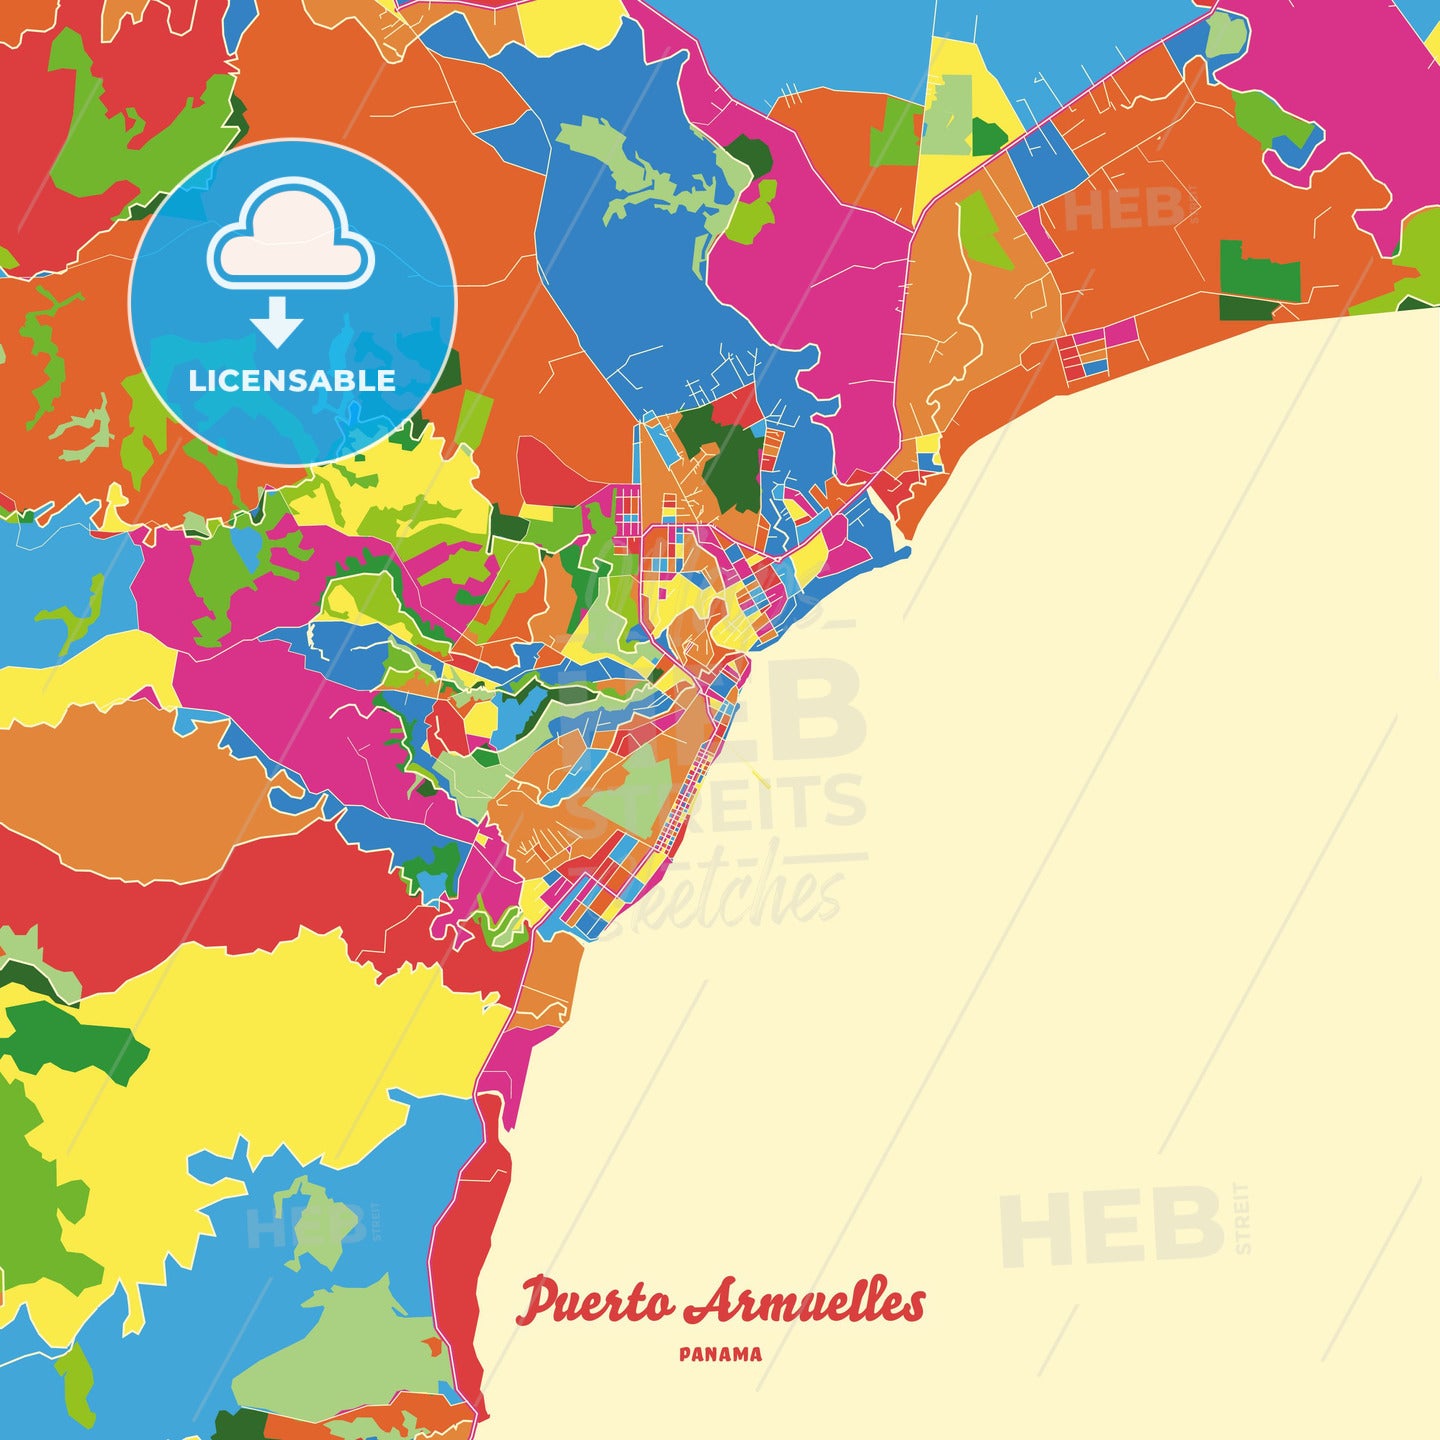 Puerto Armuelles, Panama Crazy Colorful Street Map Poster Template - HEBSTREITS Sketches